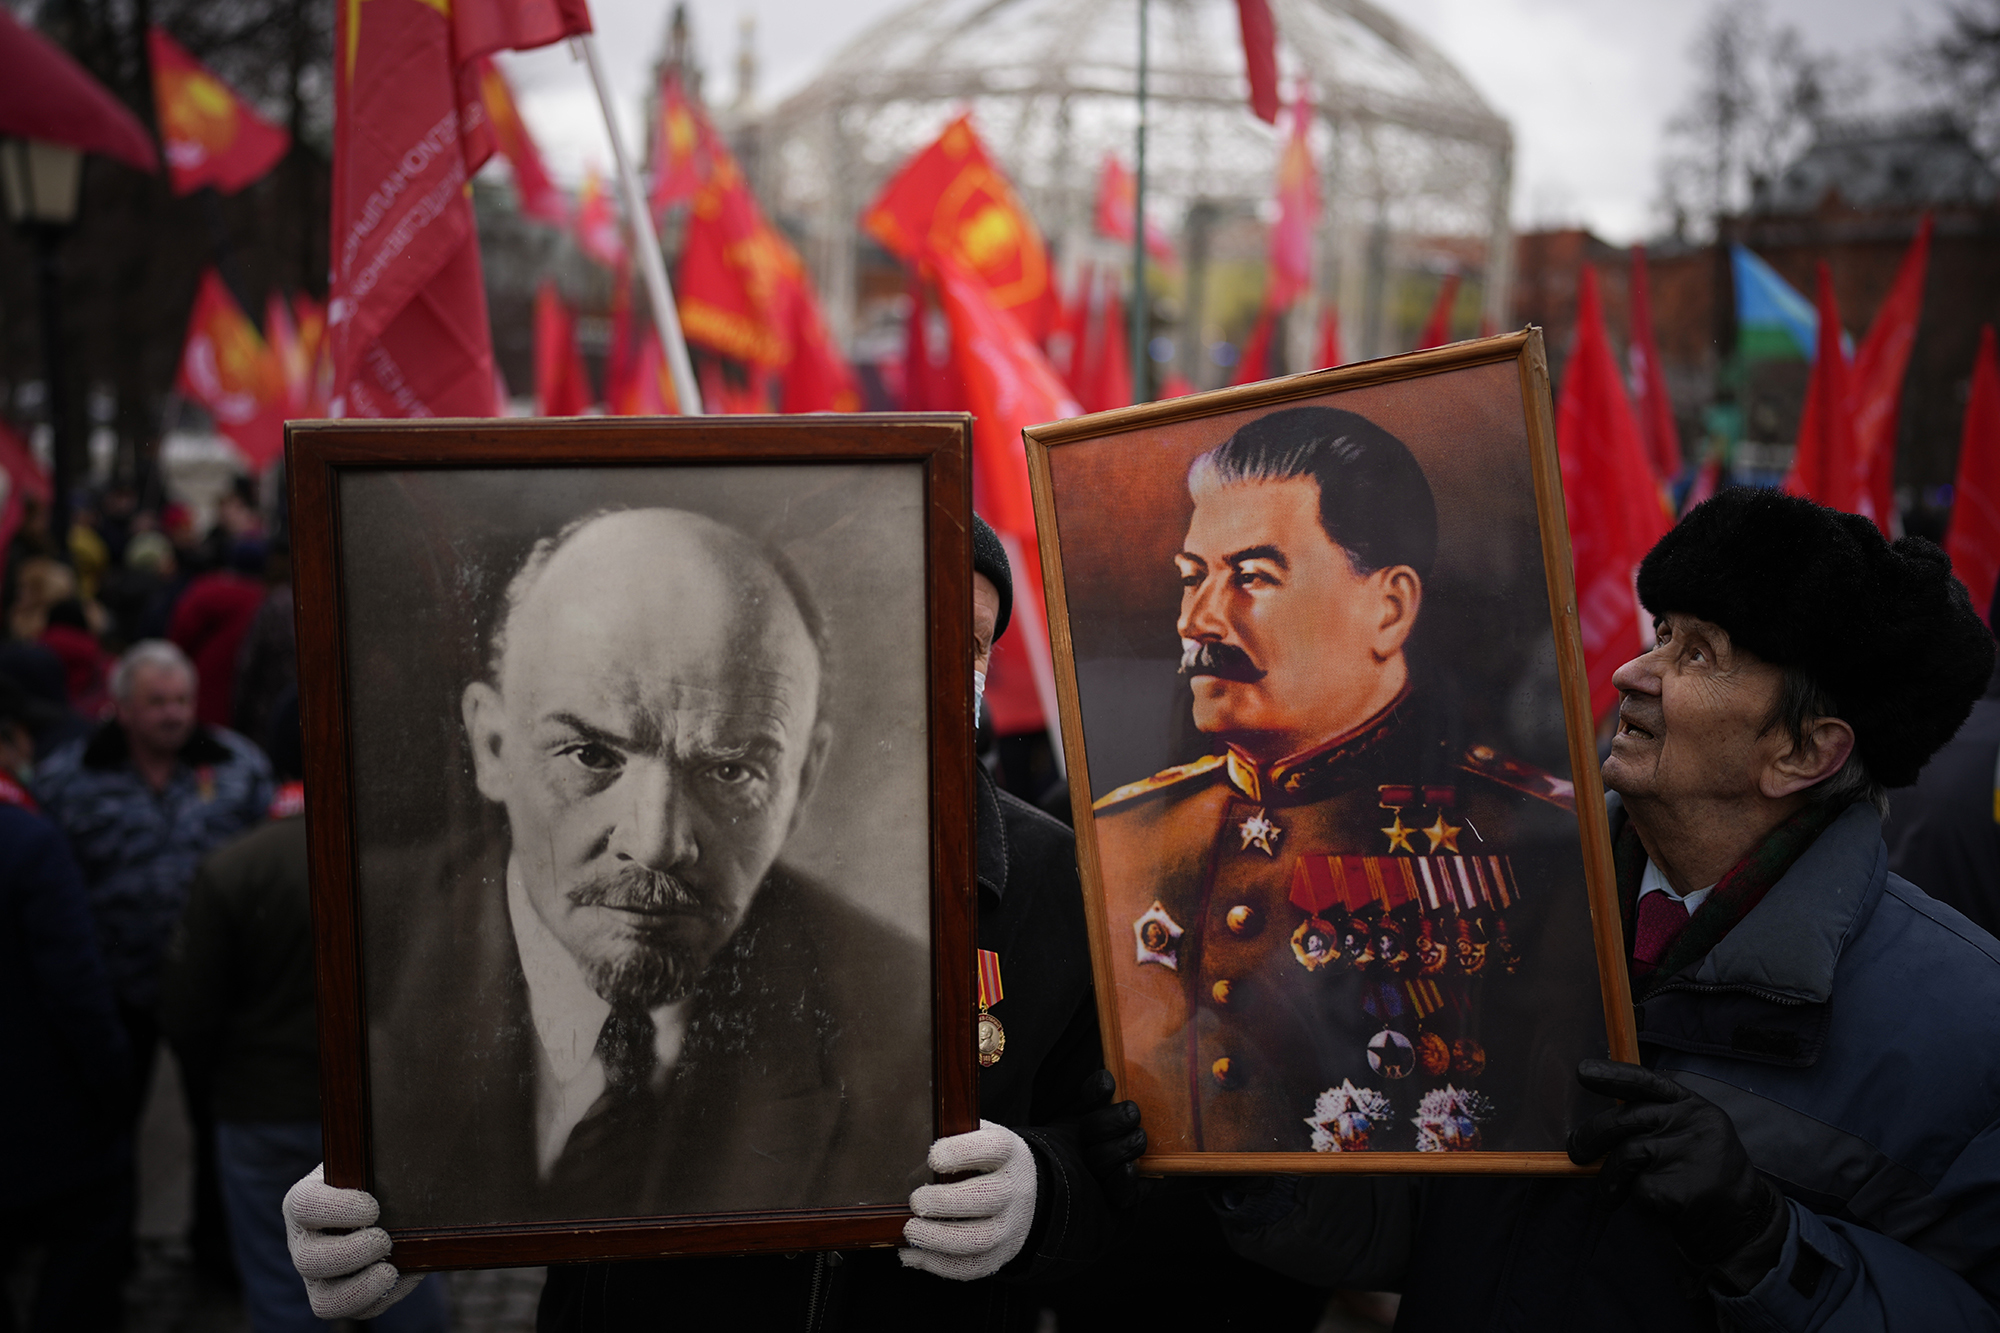 how did stalin maintain power